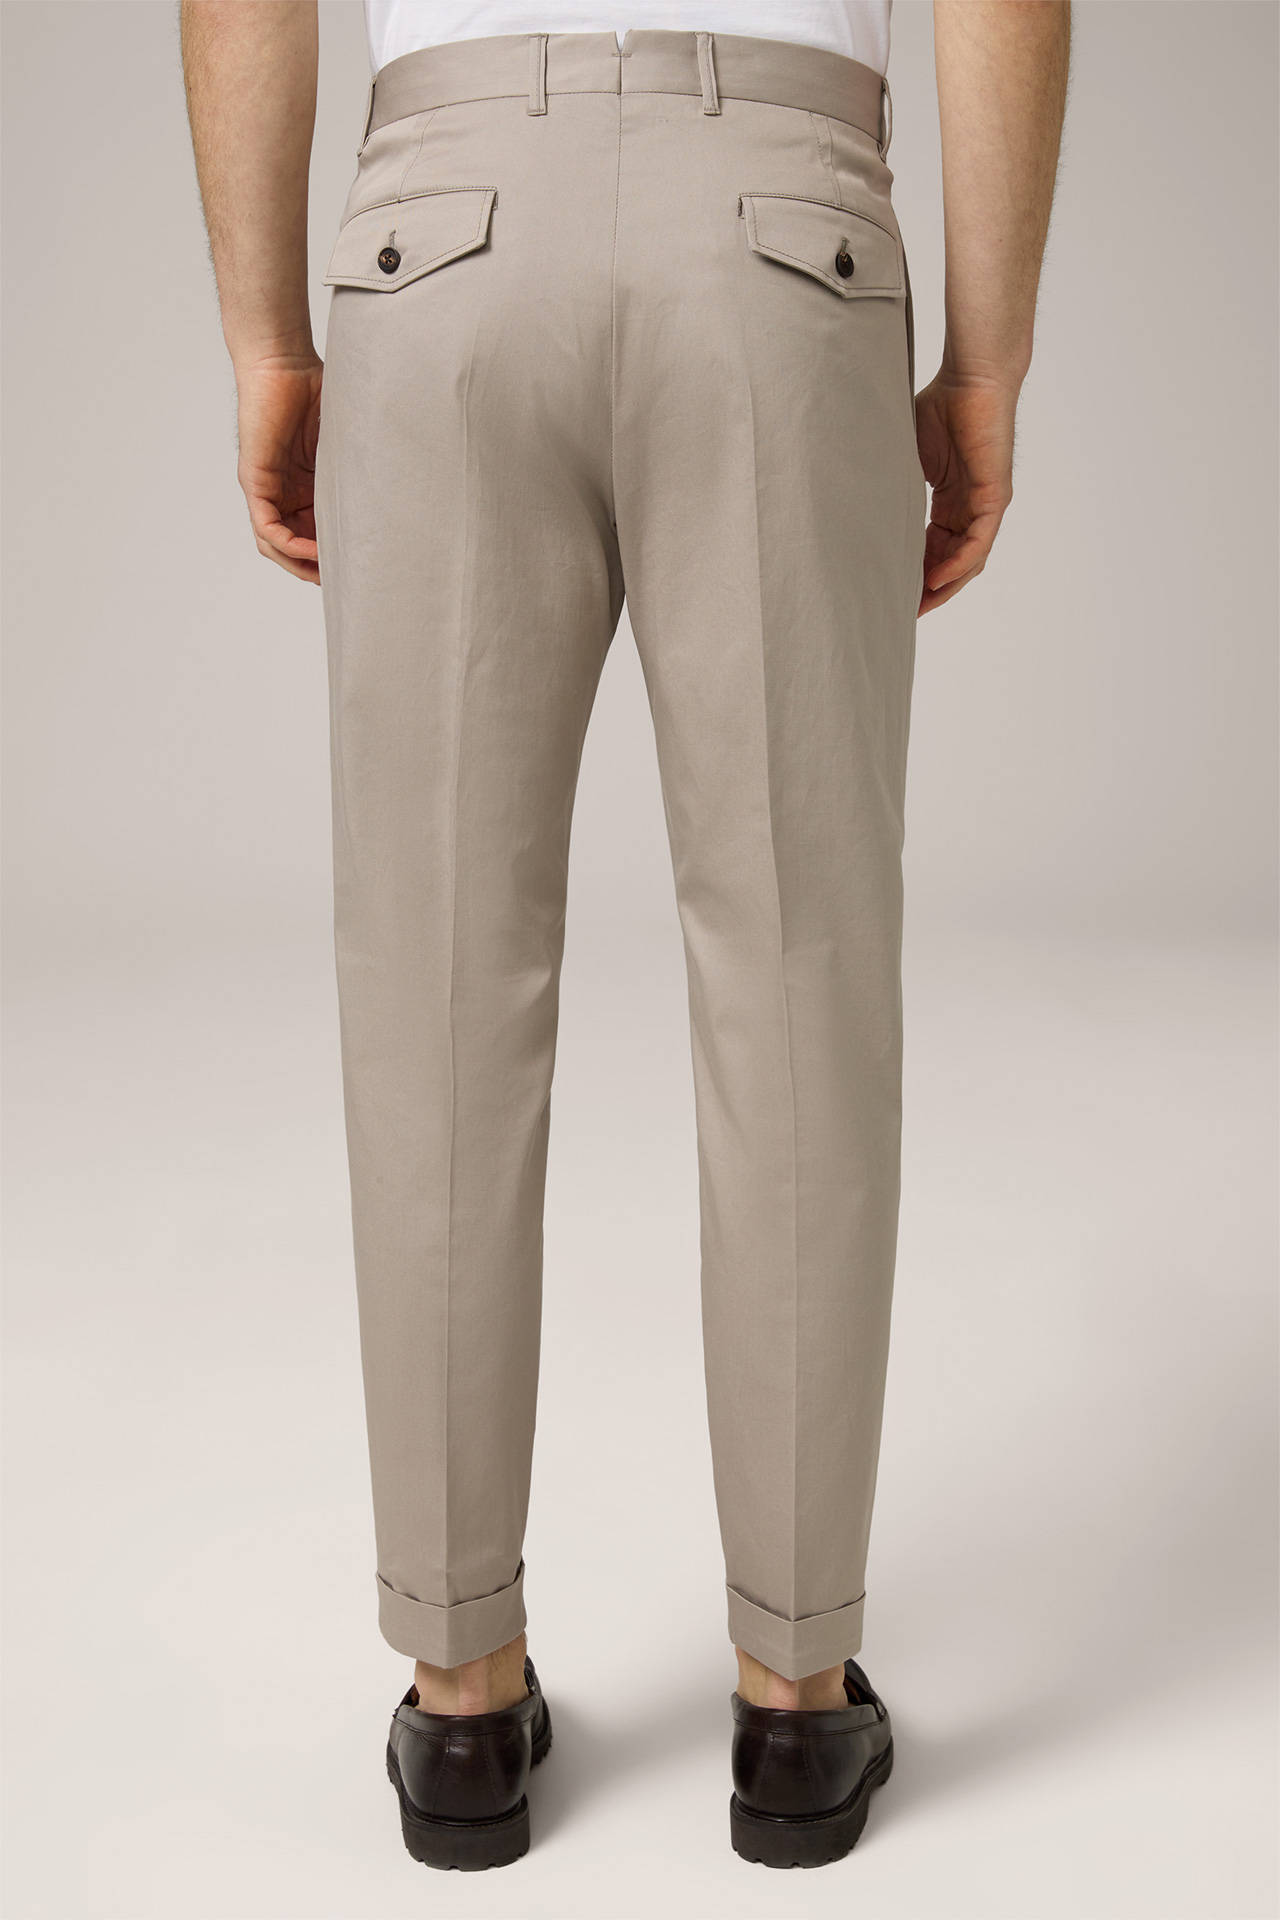 Sapo Cotton Chino with Pleats in Grey-Beige